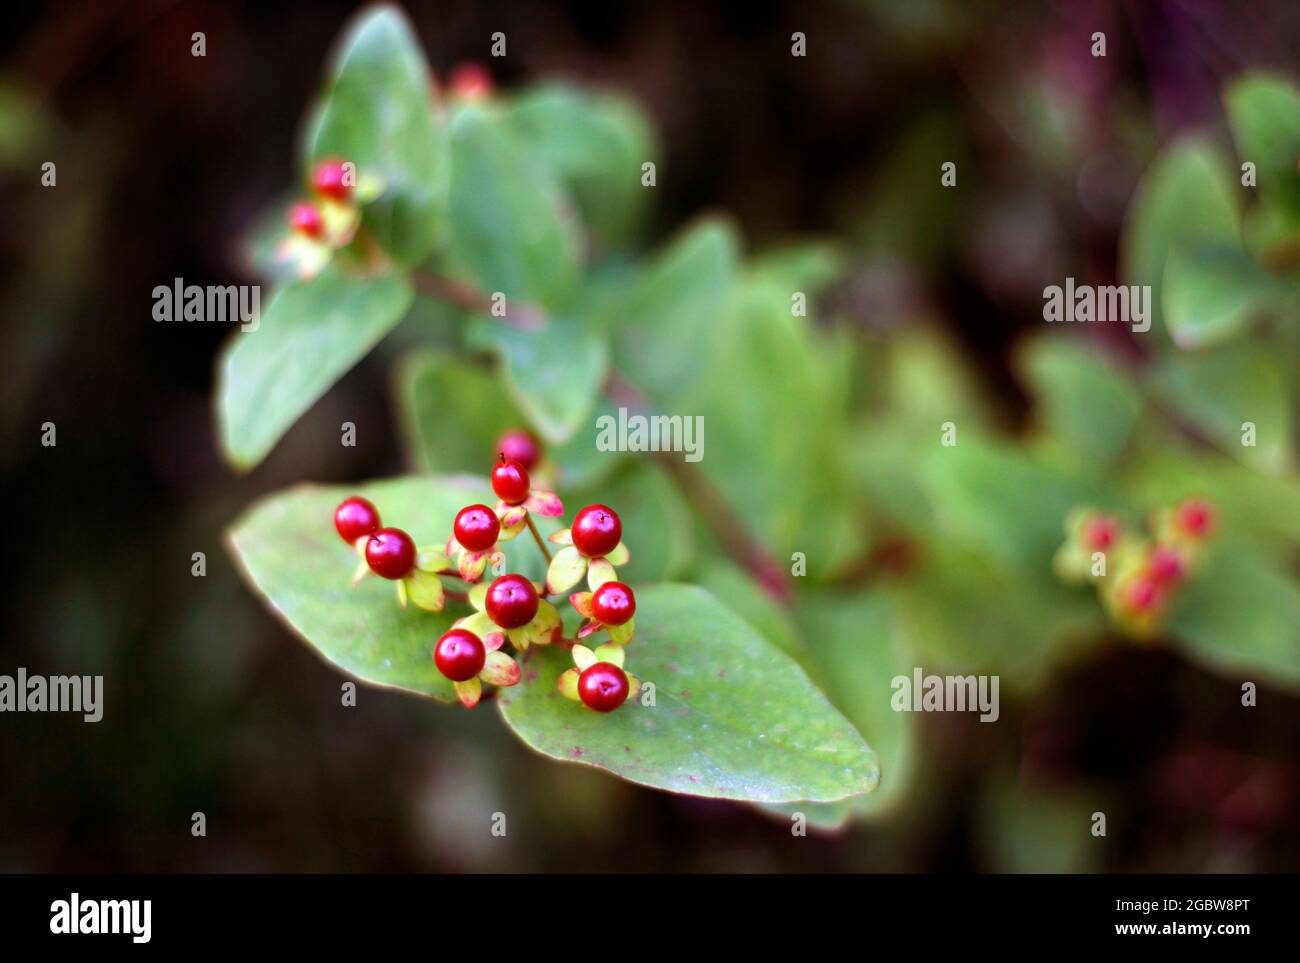 Hypericum plant after flowering showing red berries. Stock Photo